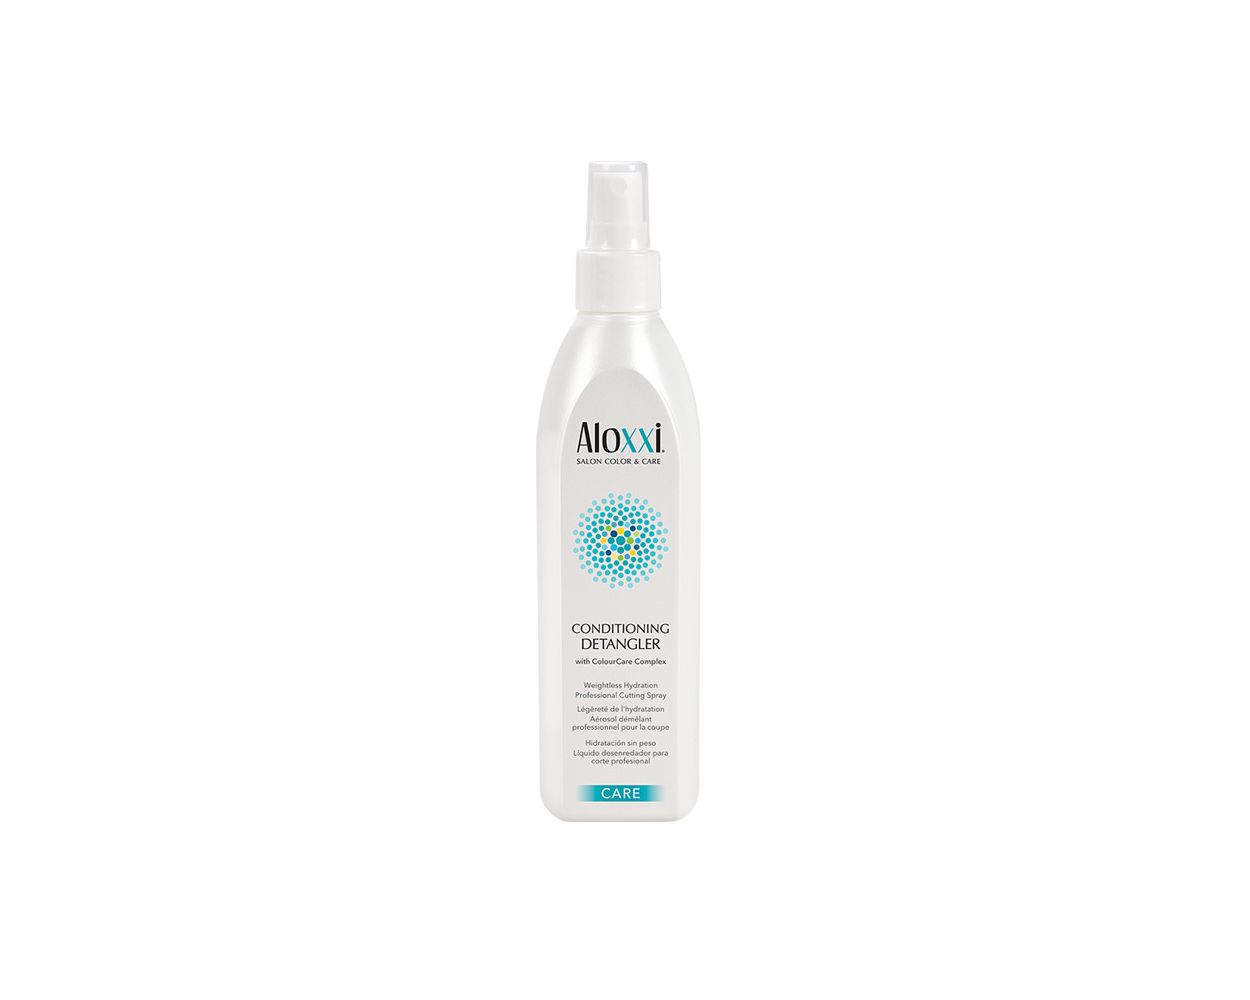 ALOXXI LEAVE-IN CONDITIONER 45ml